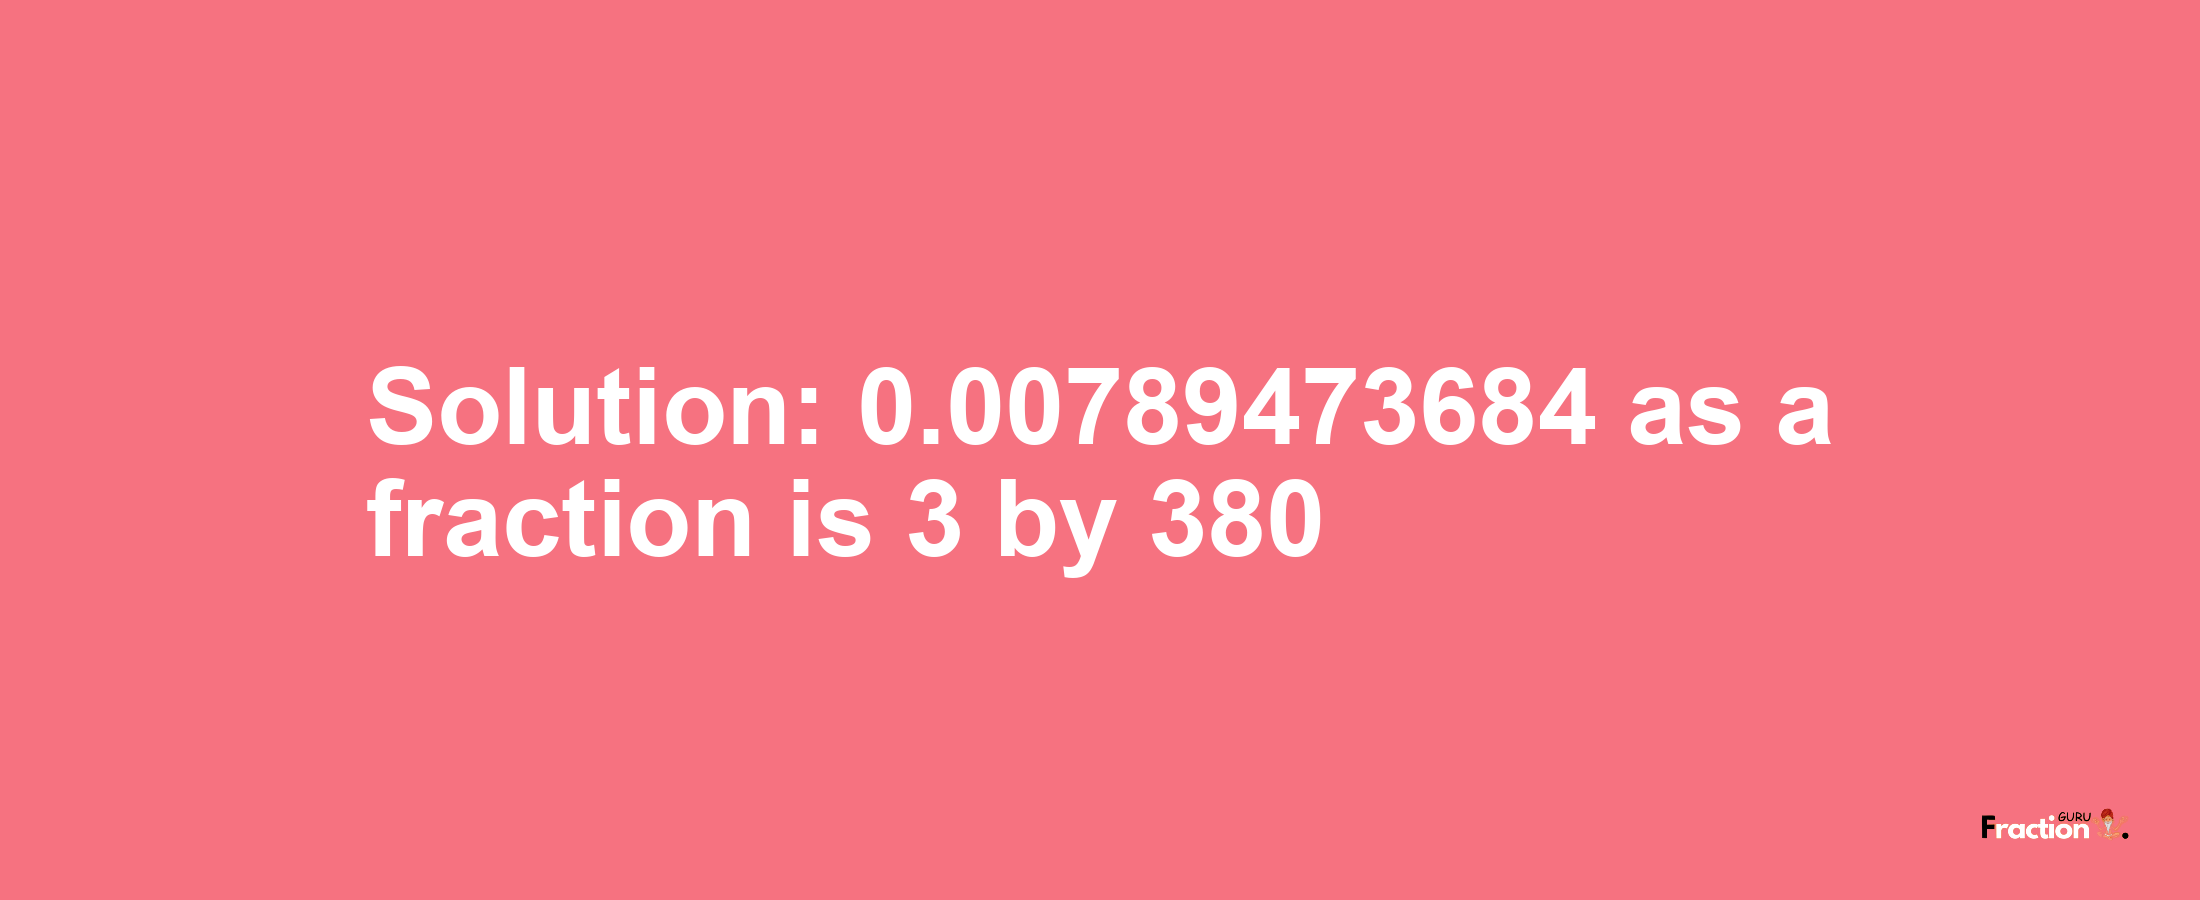 Solution:0.00789473684 as a fraction is 3/380